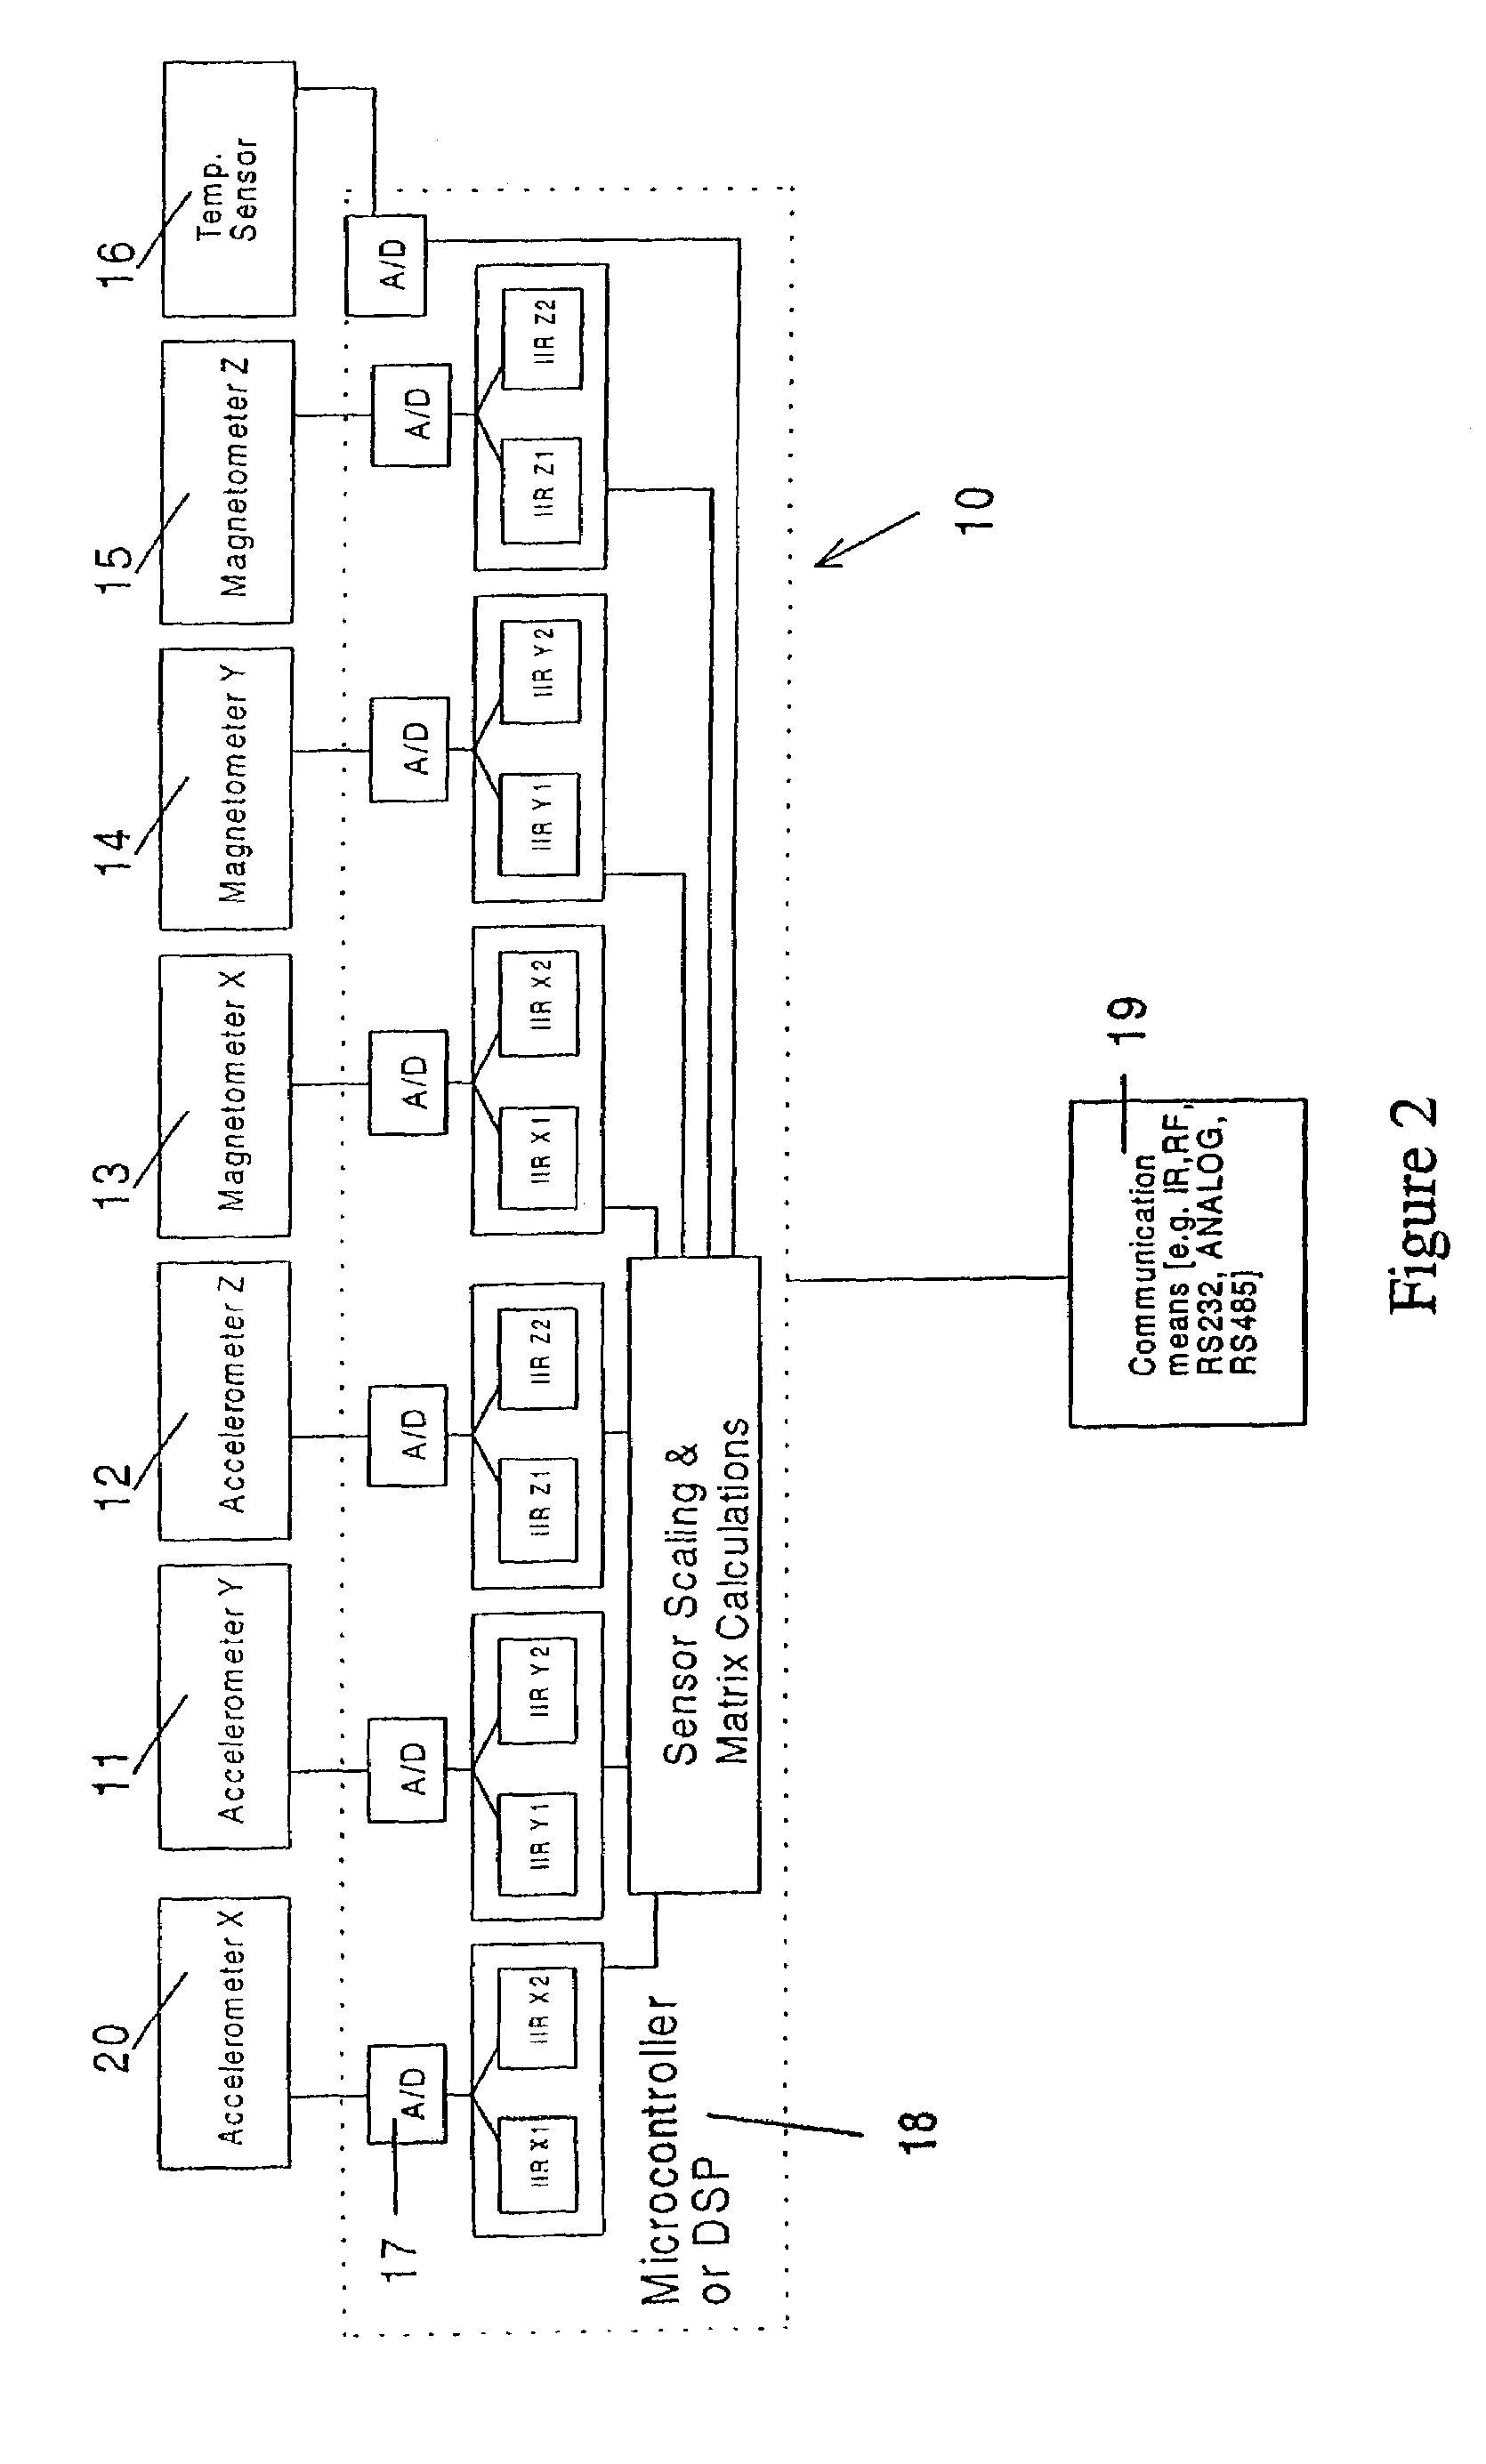 Solid state orientation sensor with 360 degree measurement capability